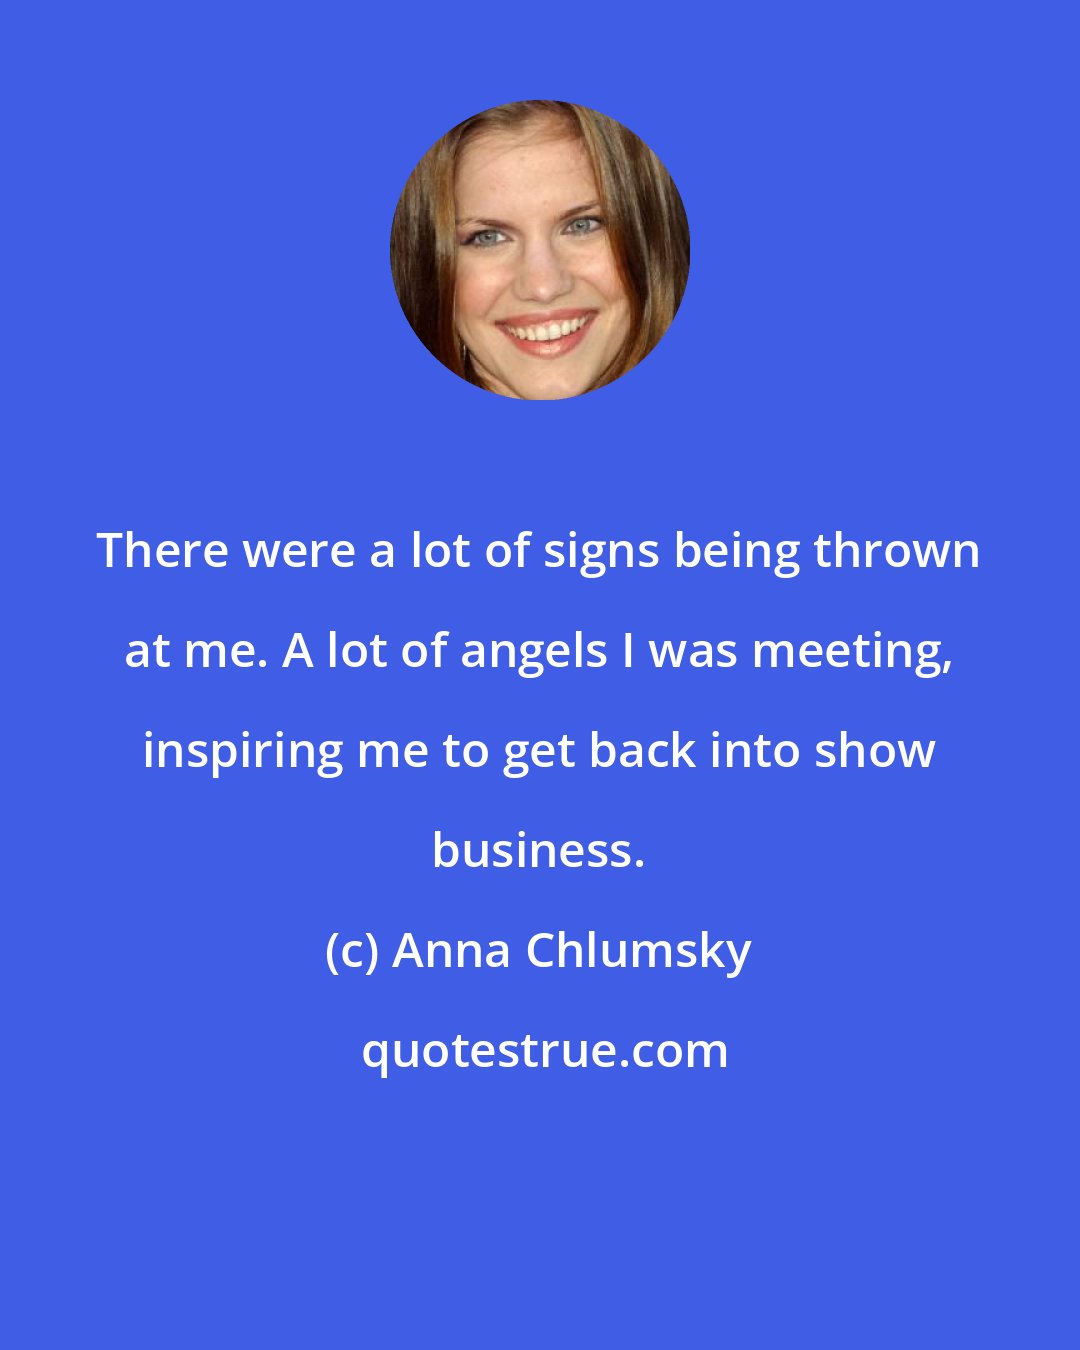 Anna Chlumsky: There were a lot of signs being thrown at me. A lot of angels I was meeting, inspiring me to get back into show business.